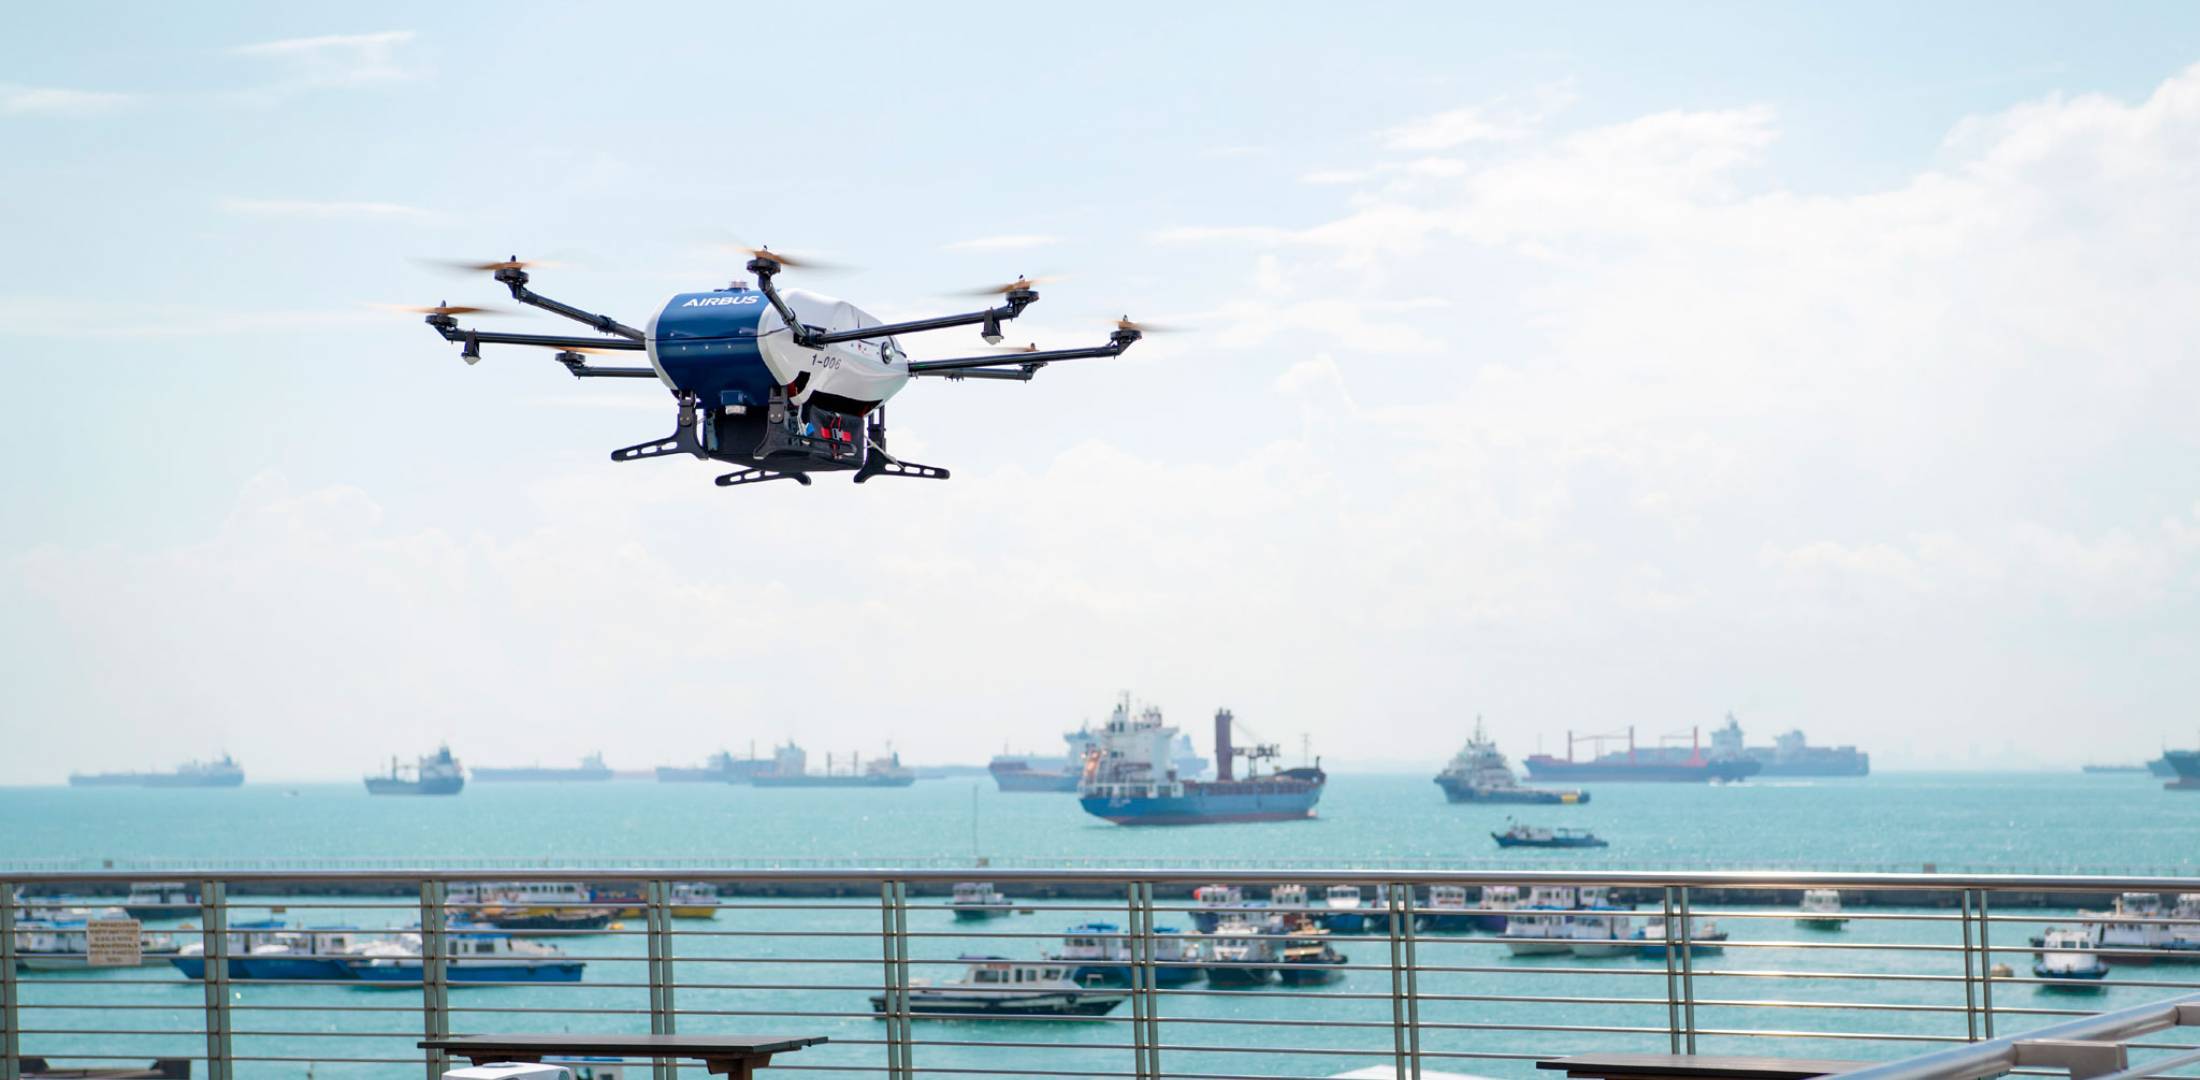 Airbus's Skyways drone delivering cargo to ships docked off Singapore.